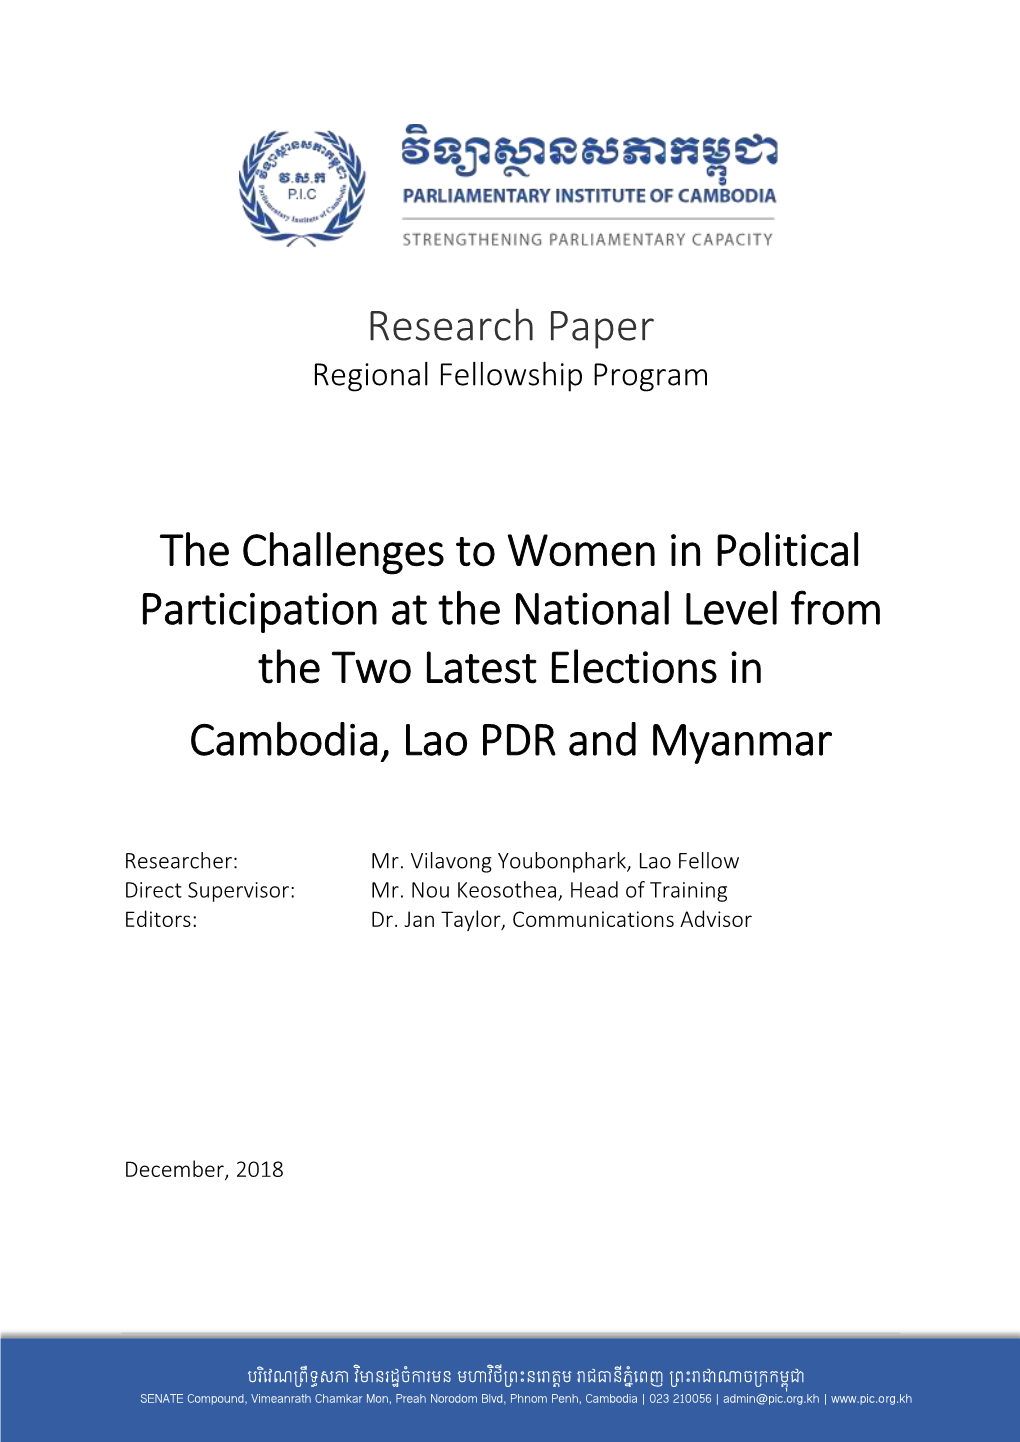 The Challenges to Women in Political Participation at the National Level from the Two Latest Elections in Cambodia, Lao PDR and Myanmar